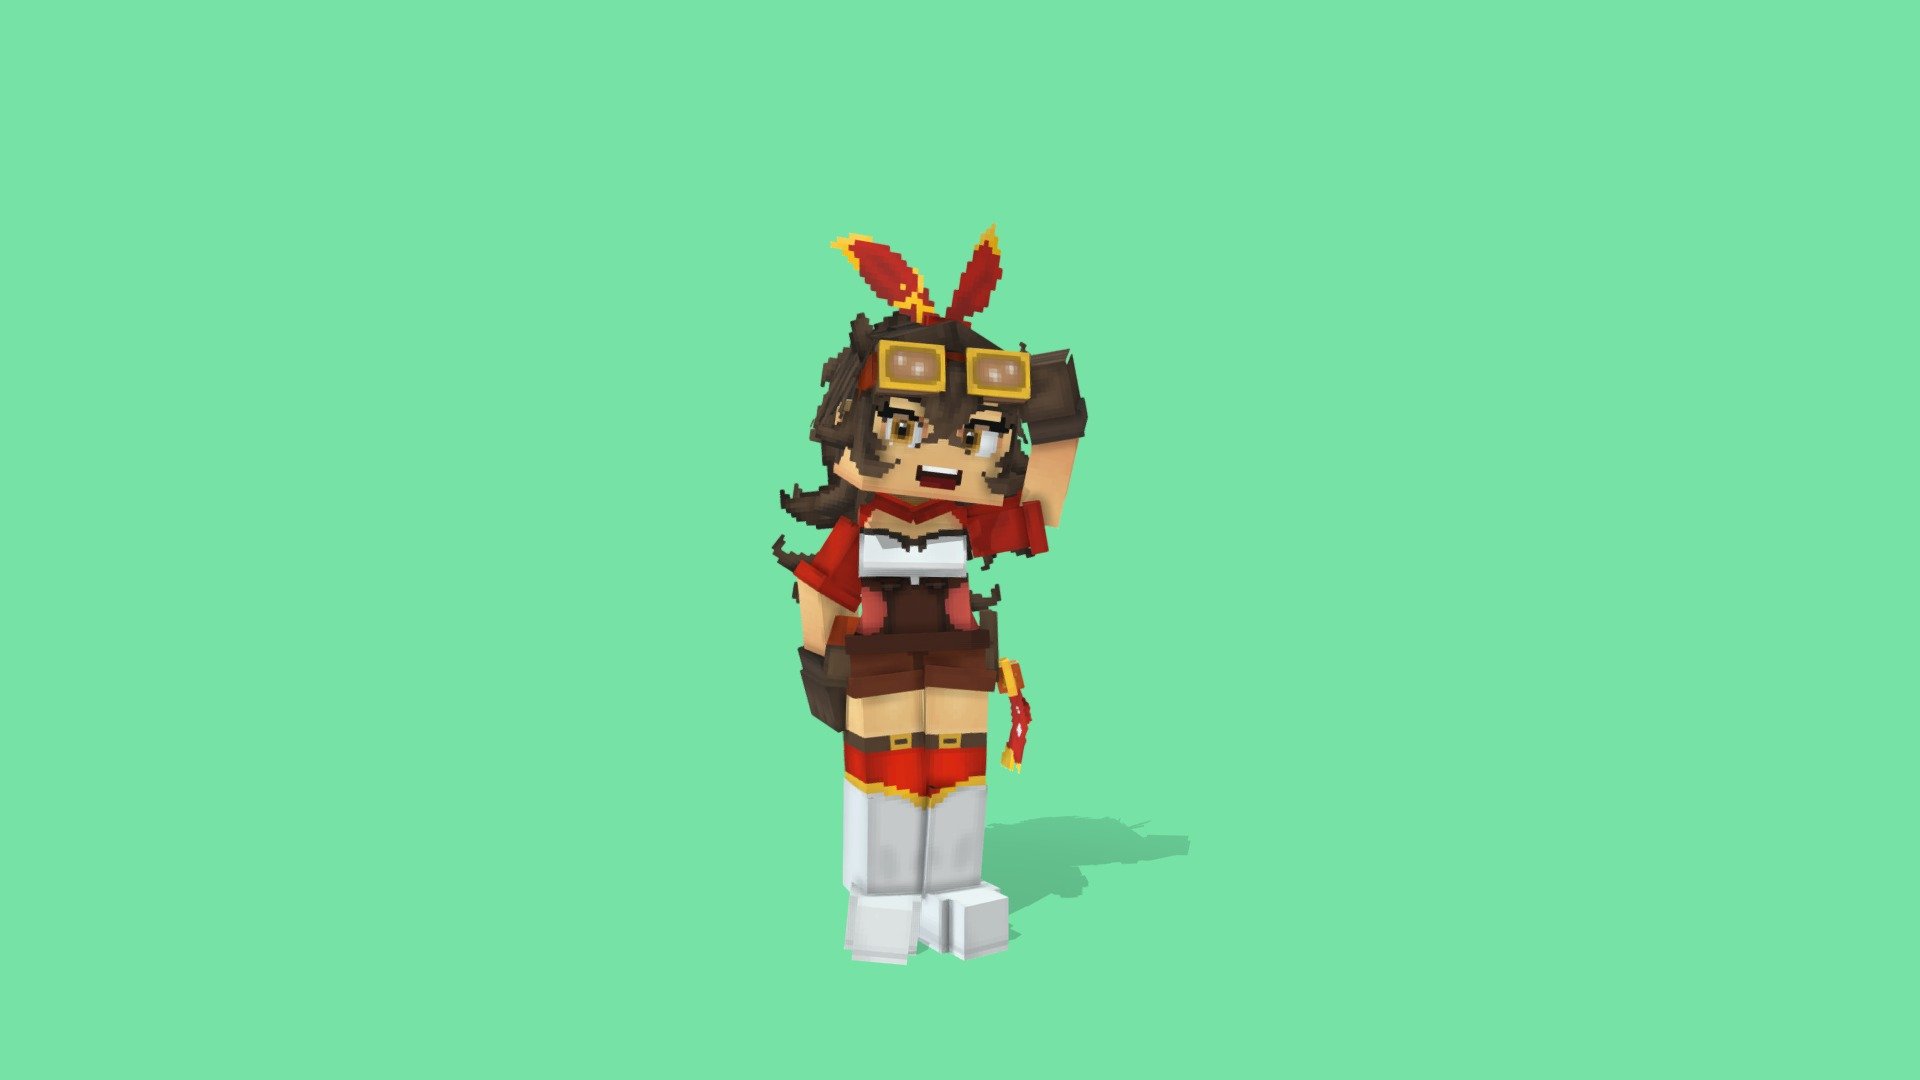 Amber from the game Genshin Impact by miHoYo in the hytale artstyle 3d model